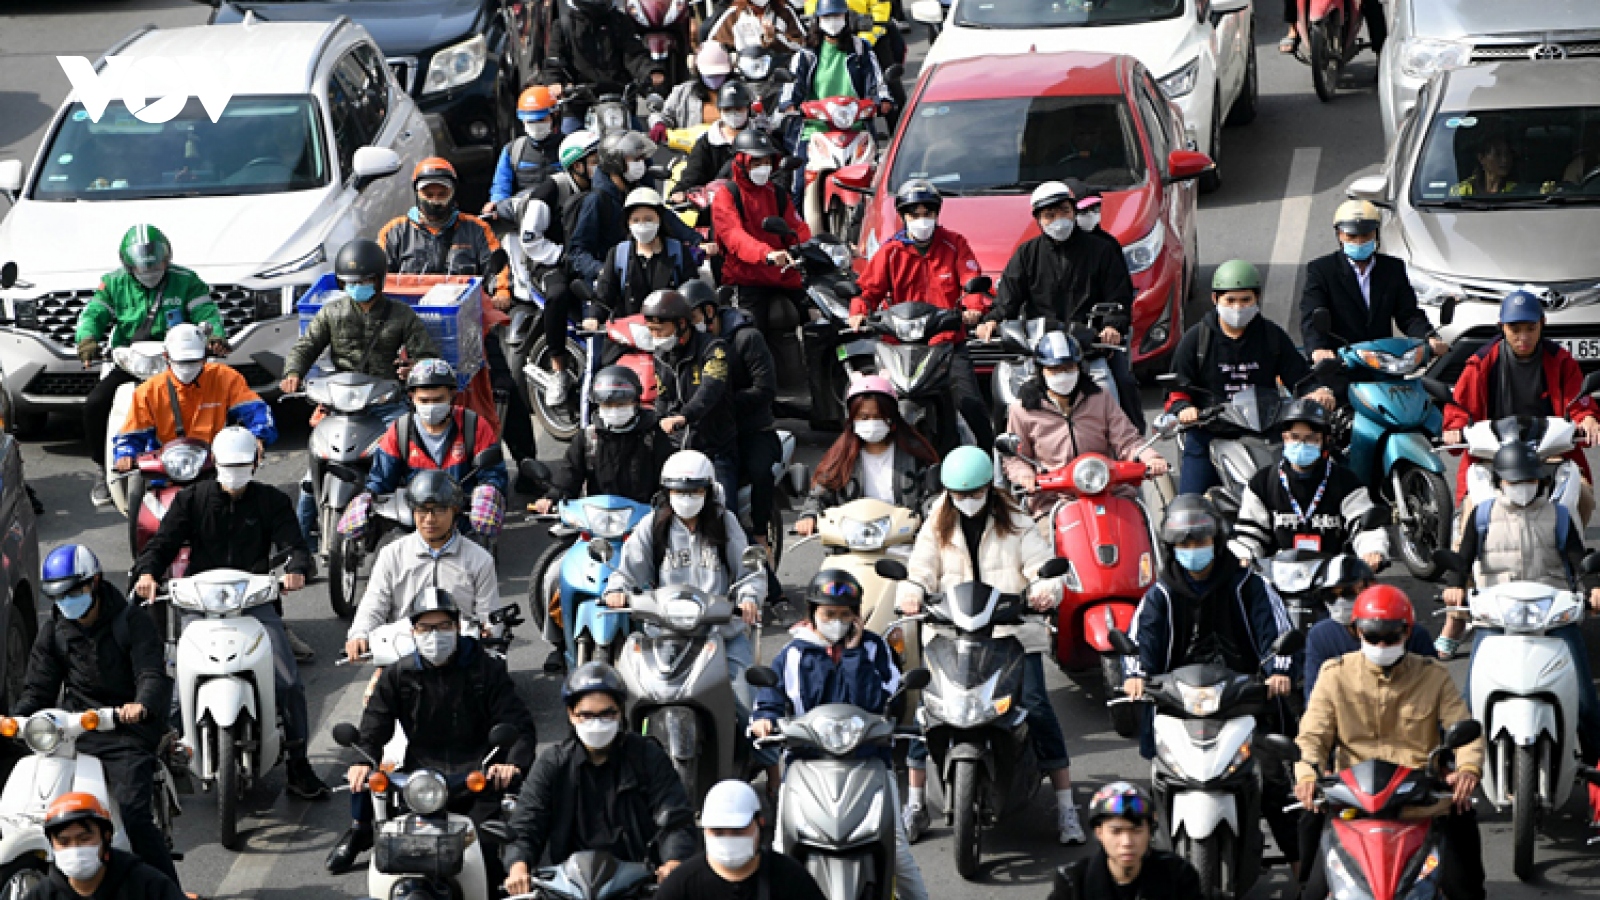 Vietnamese population hits 100 million this year – a bittersweet story